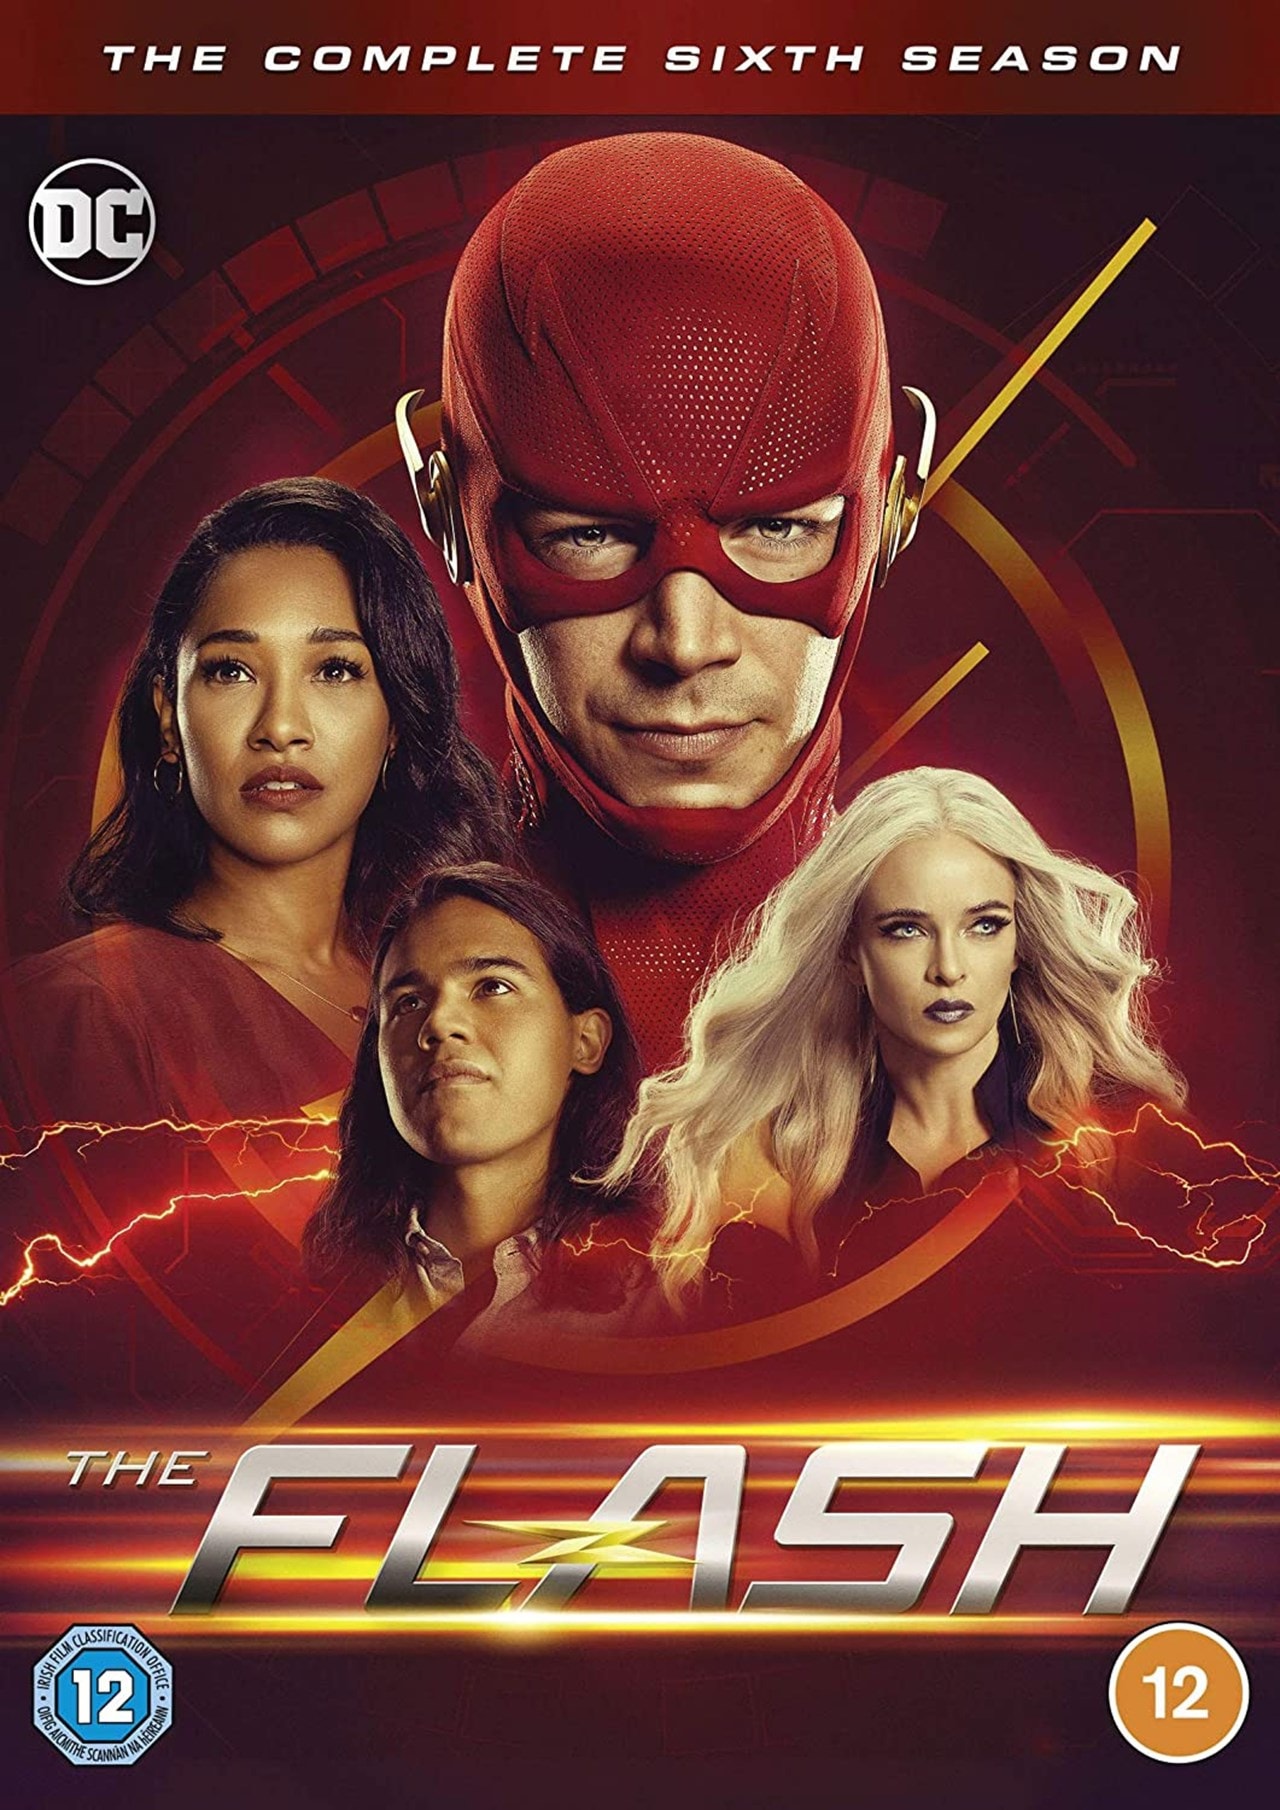 The Flash The Complete Sixth Season Dvd Box Set Free Shipping Over Hmv Store